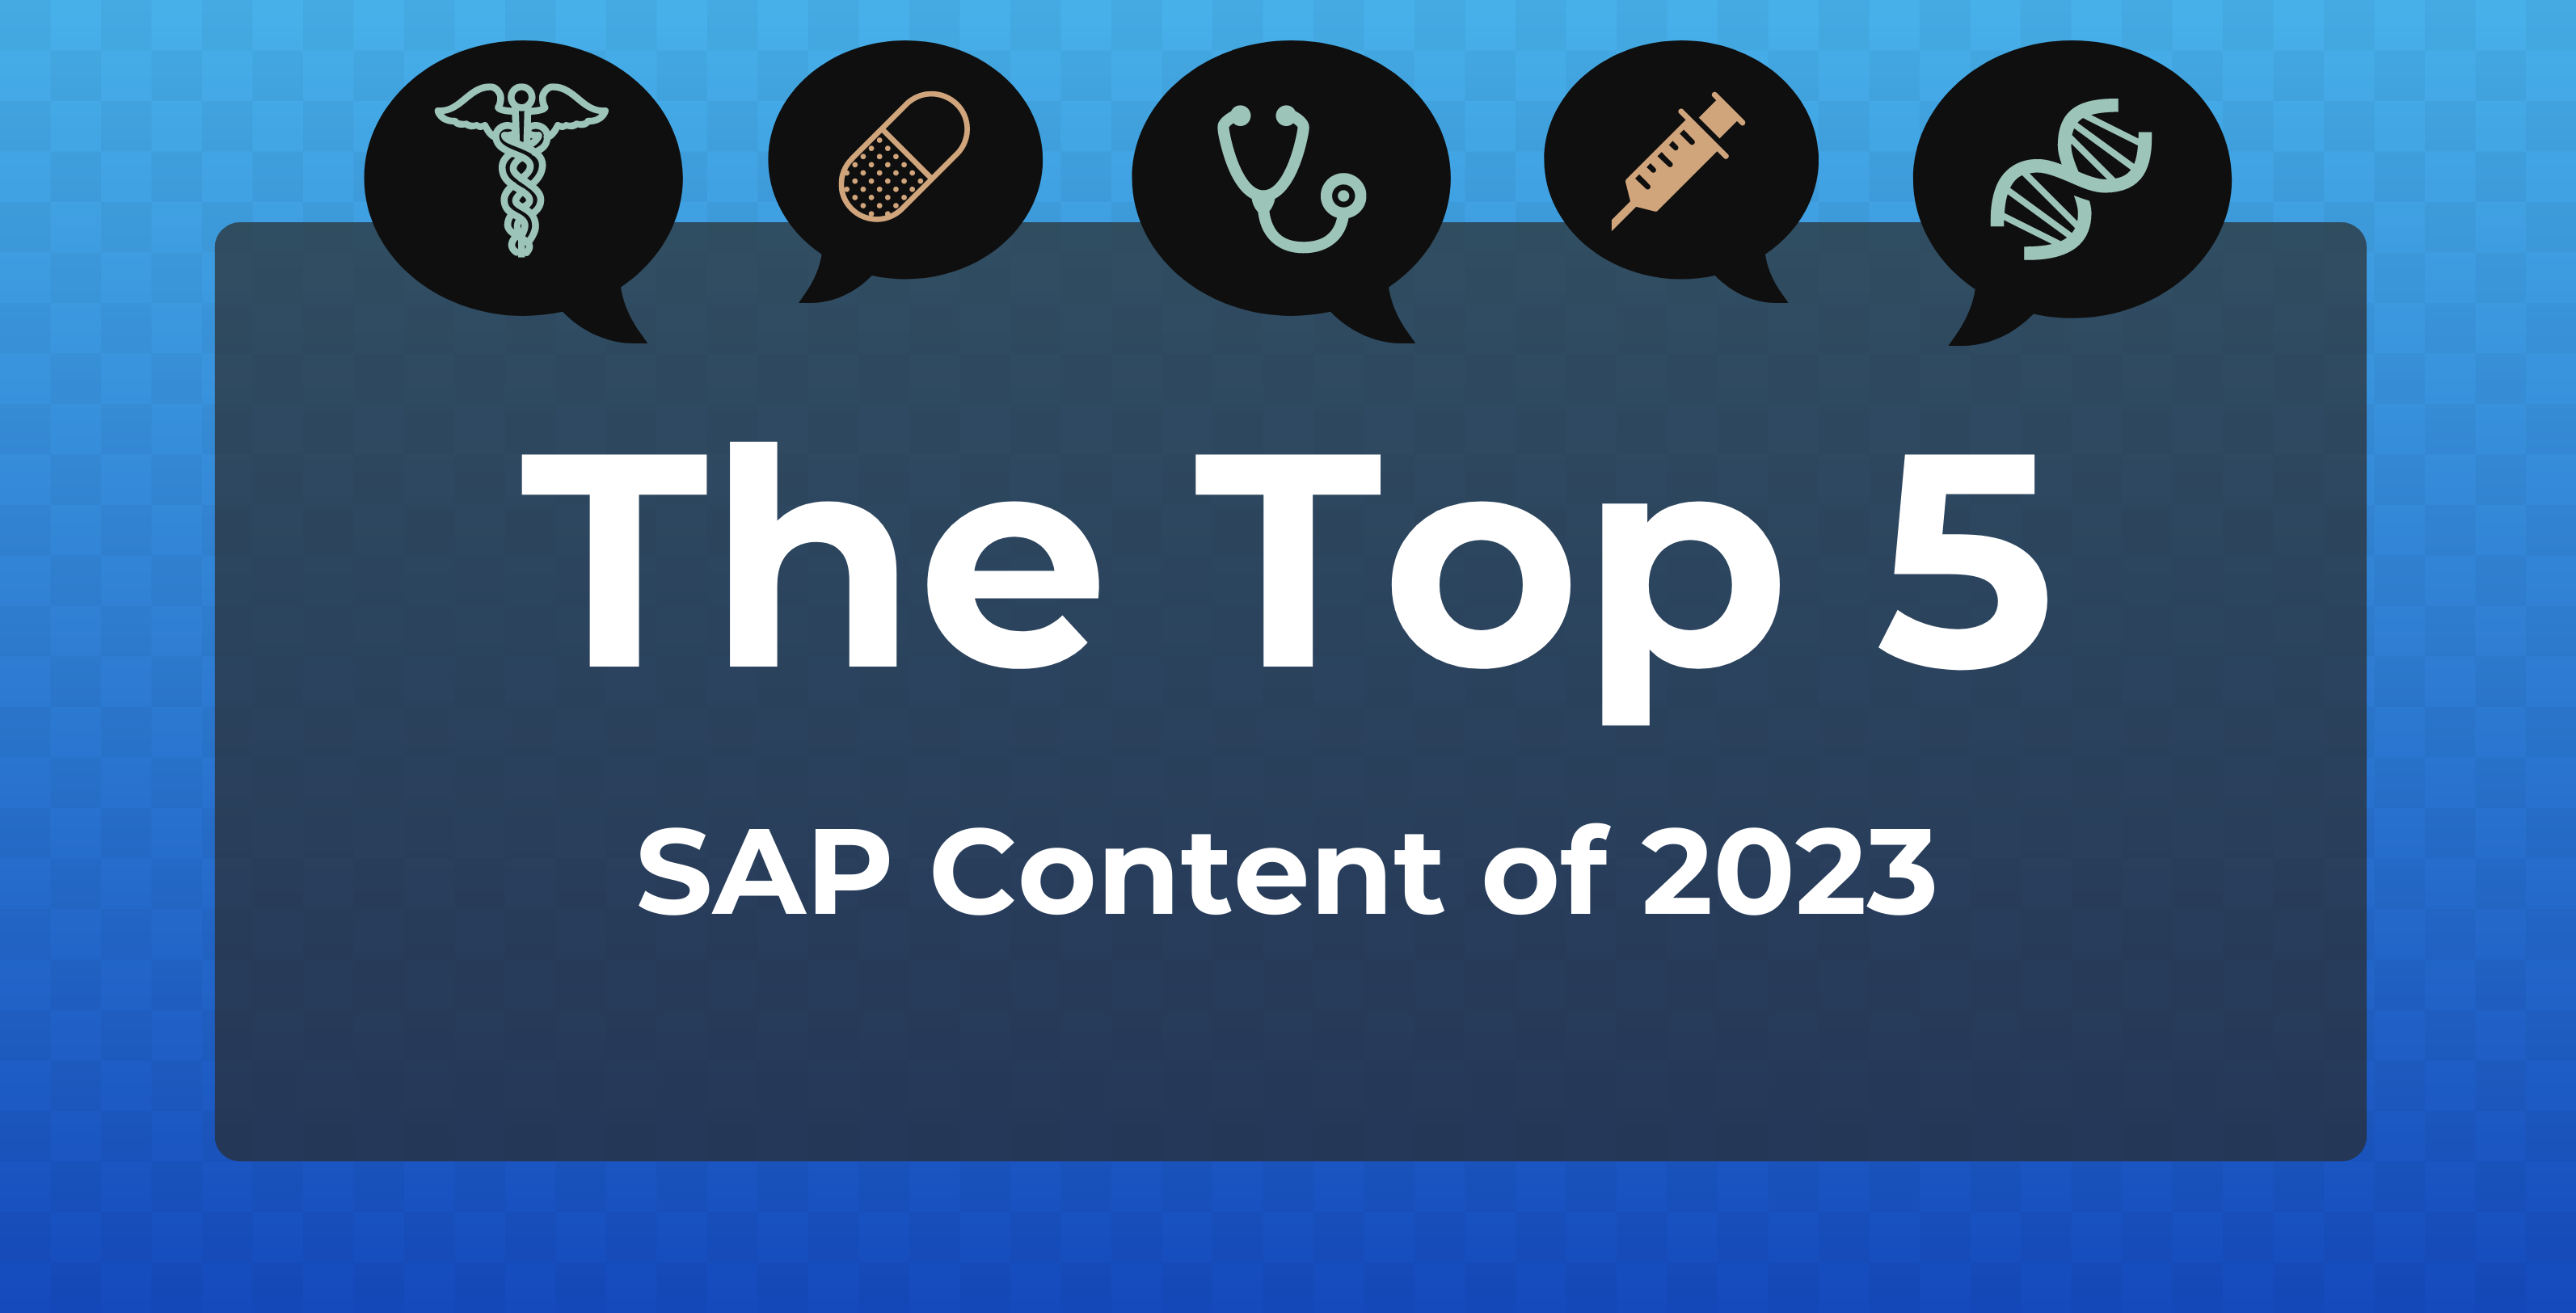 The Top 5 SAP Content of 2023